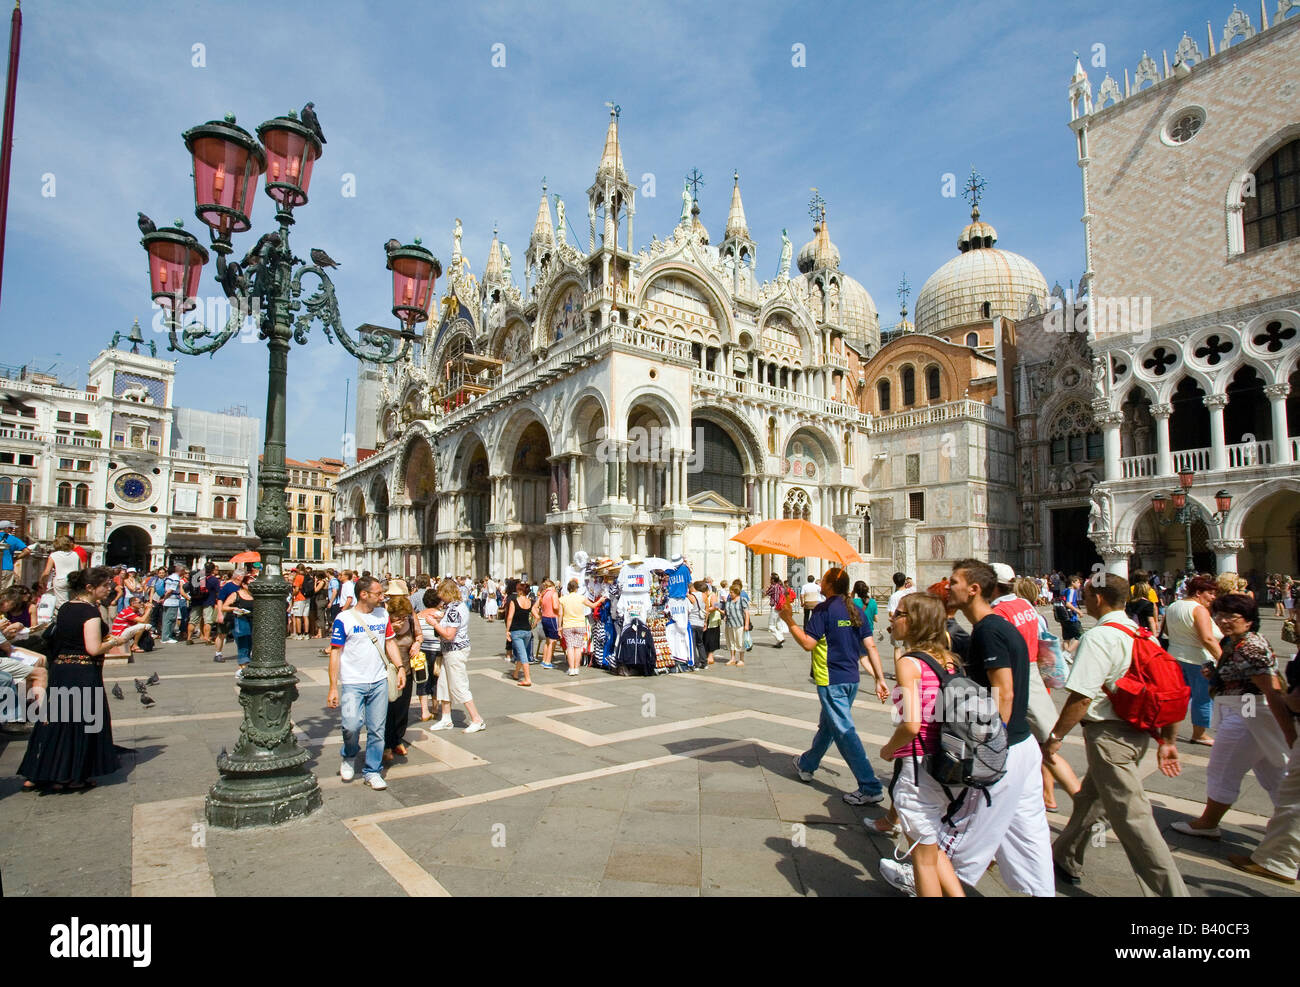 People sightseeing in St Marks Square in Venice Italy Stock Photo